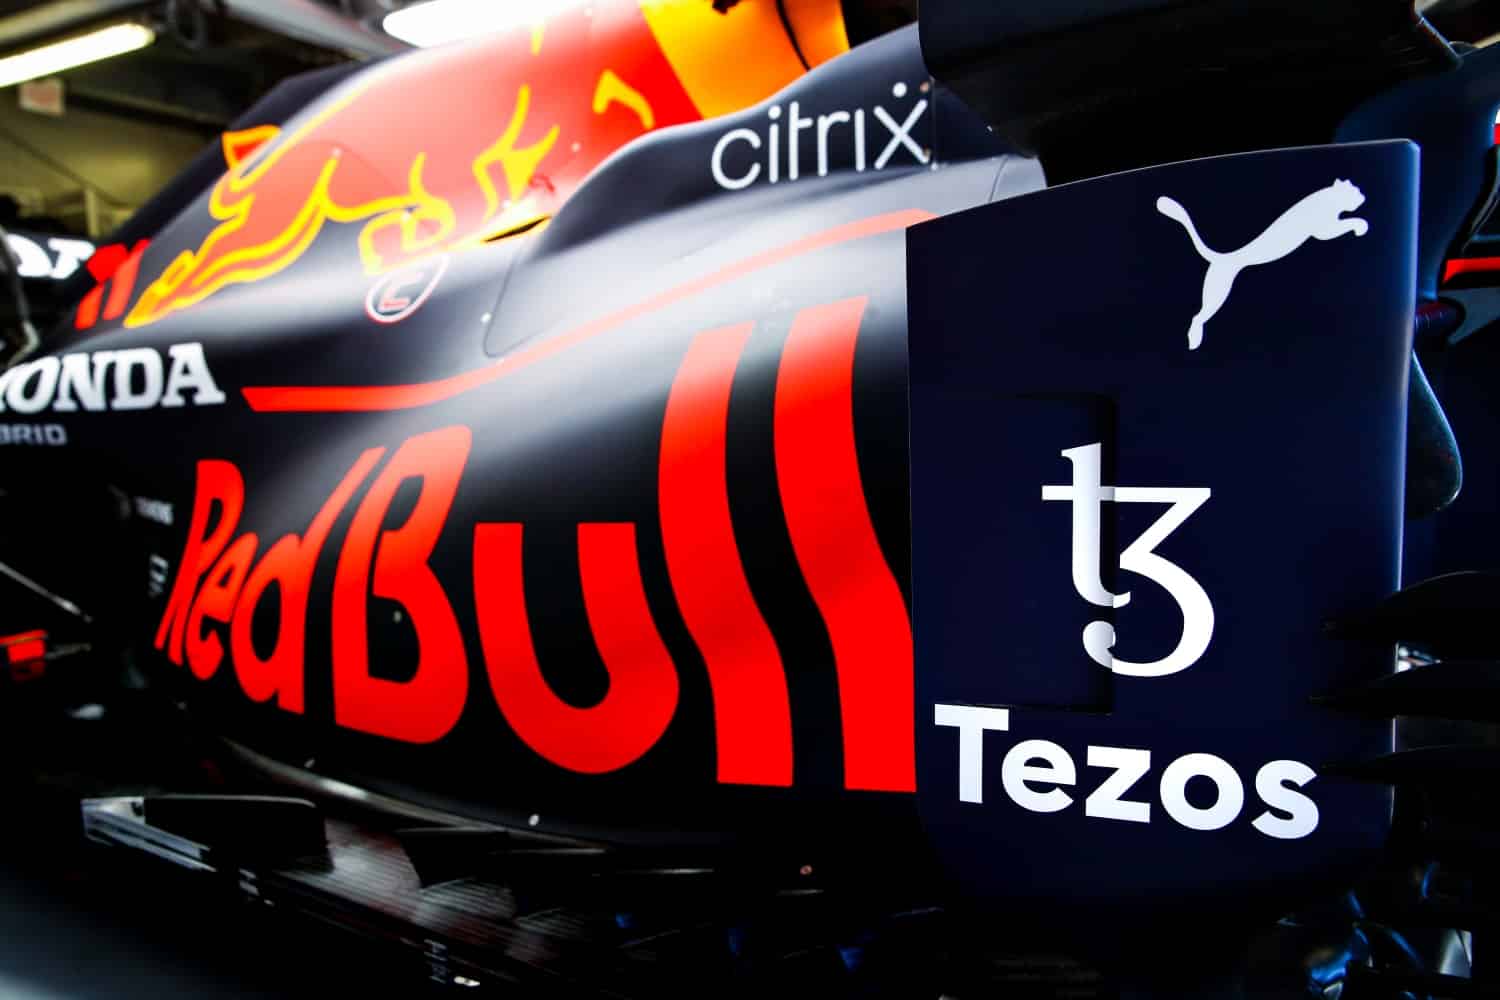 Red Bull Racing Honda presents its limited edition NFT in collaboration with blockchain Tezos